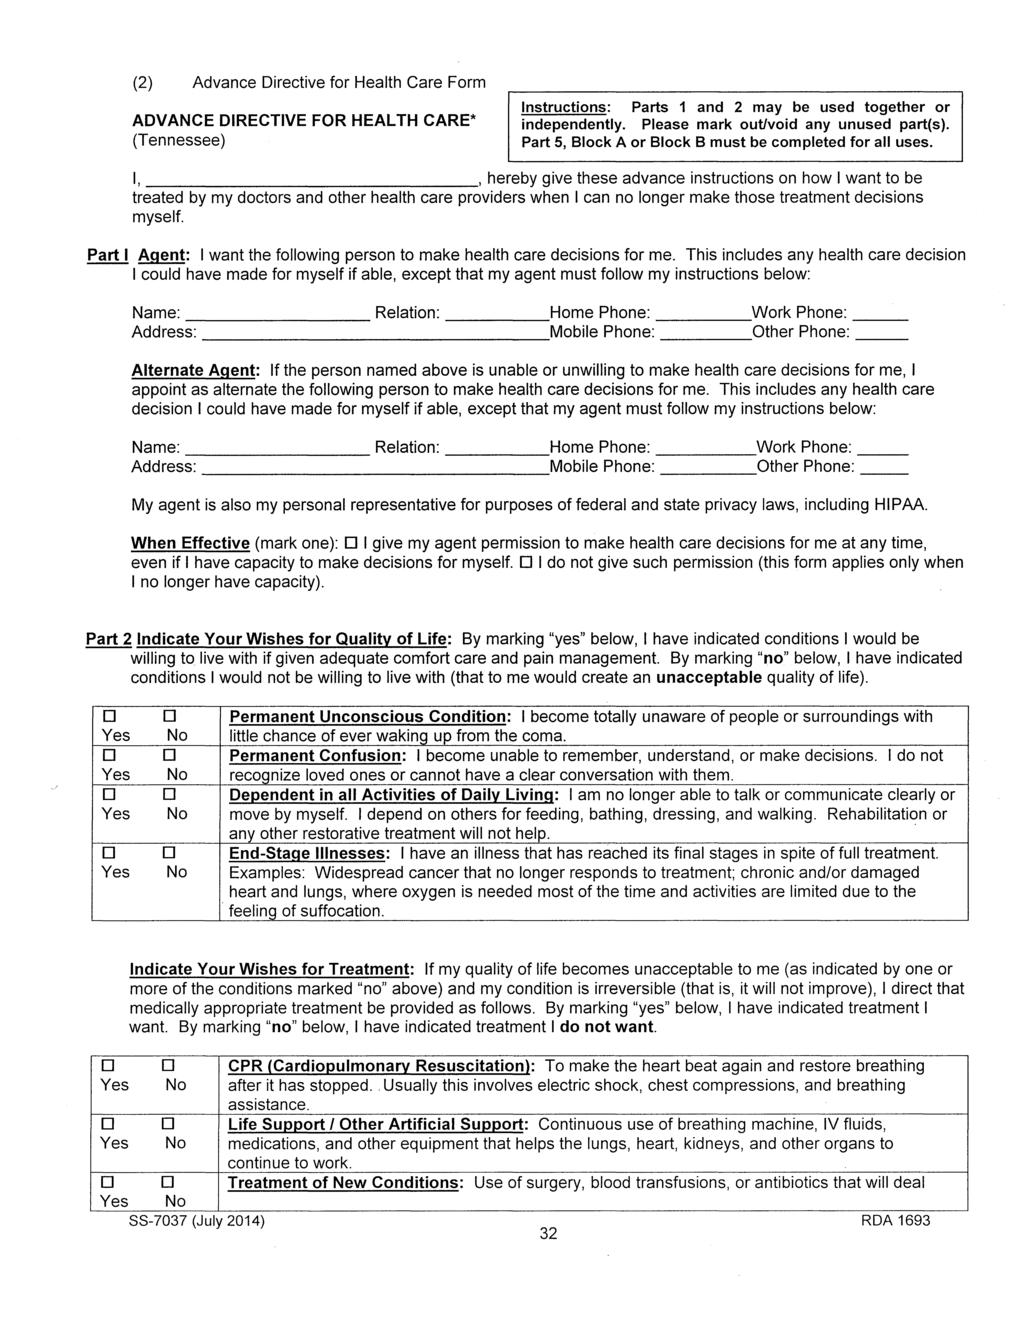 (2) Advance irective for Health Care Form AVANCE IRECTIVE FOR HEAL TH CARE* (Tennessee) Instructions: Parts 1 and 2 may be used together or independently. Please mark out/void any unused part(s).